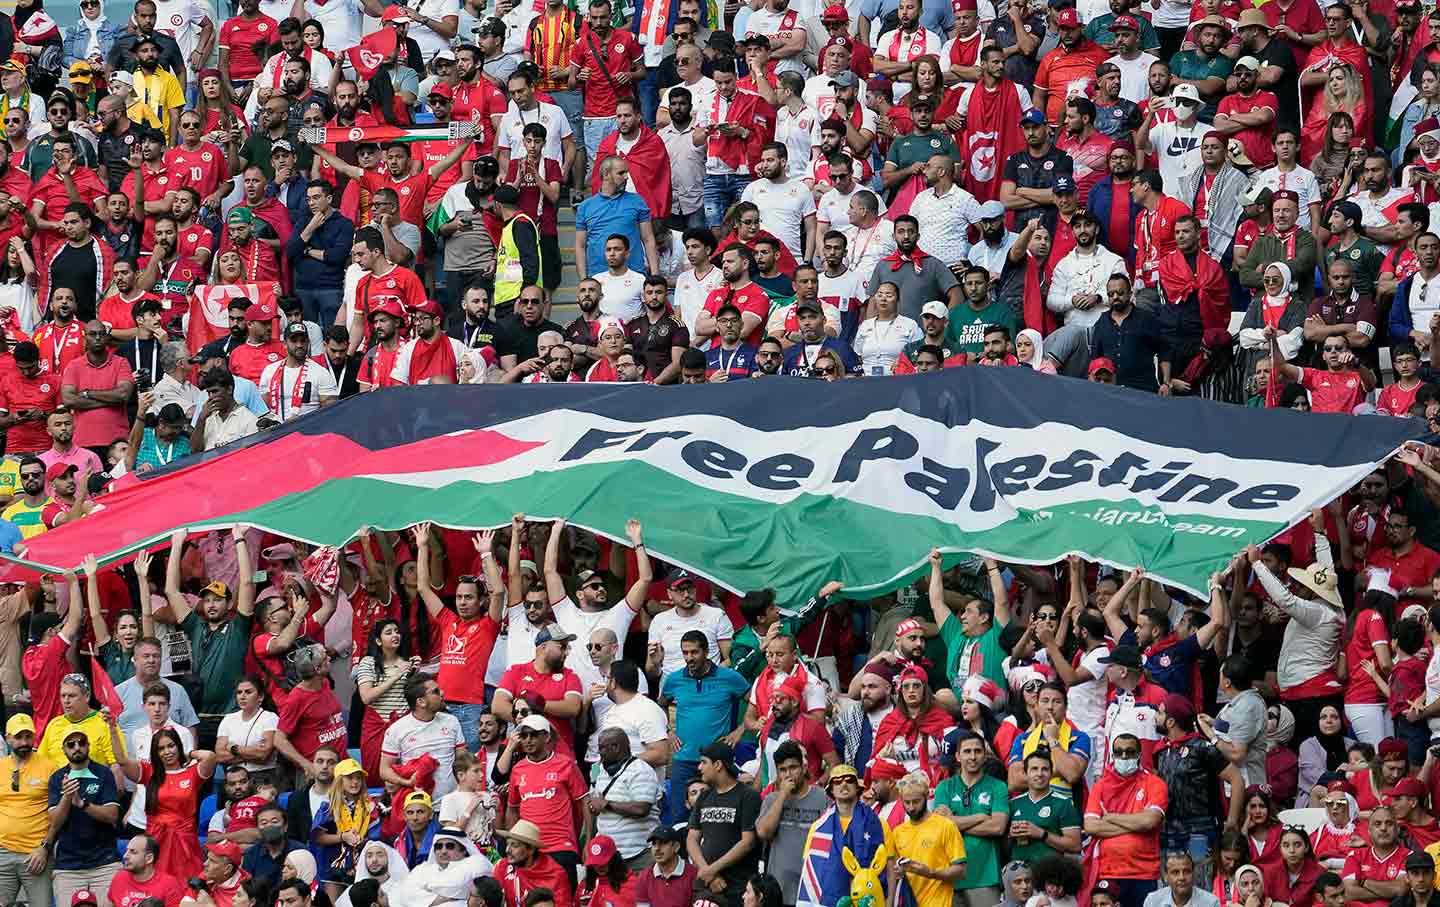 Soccer fans unfurl a flag that reads Free Palestine at the World Cup in Qatar.